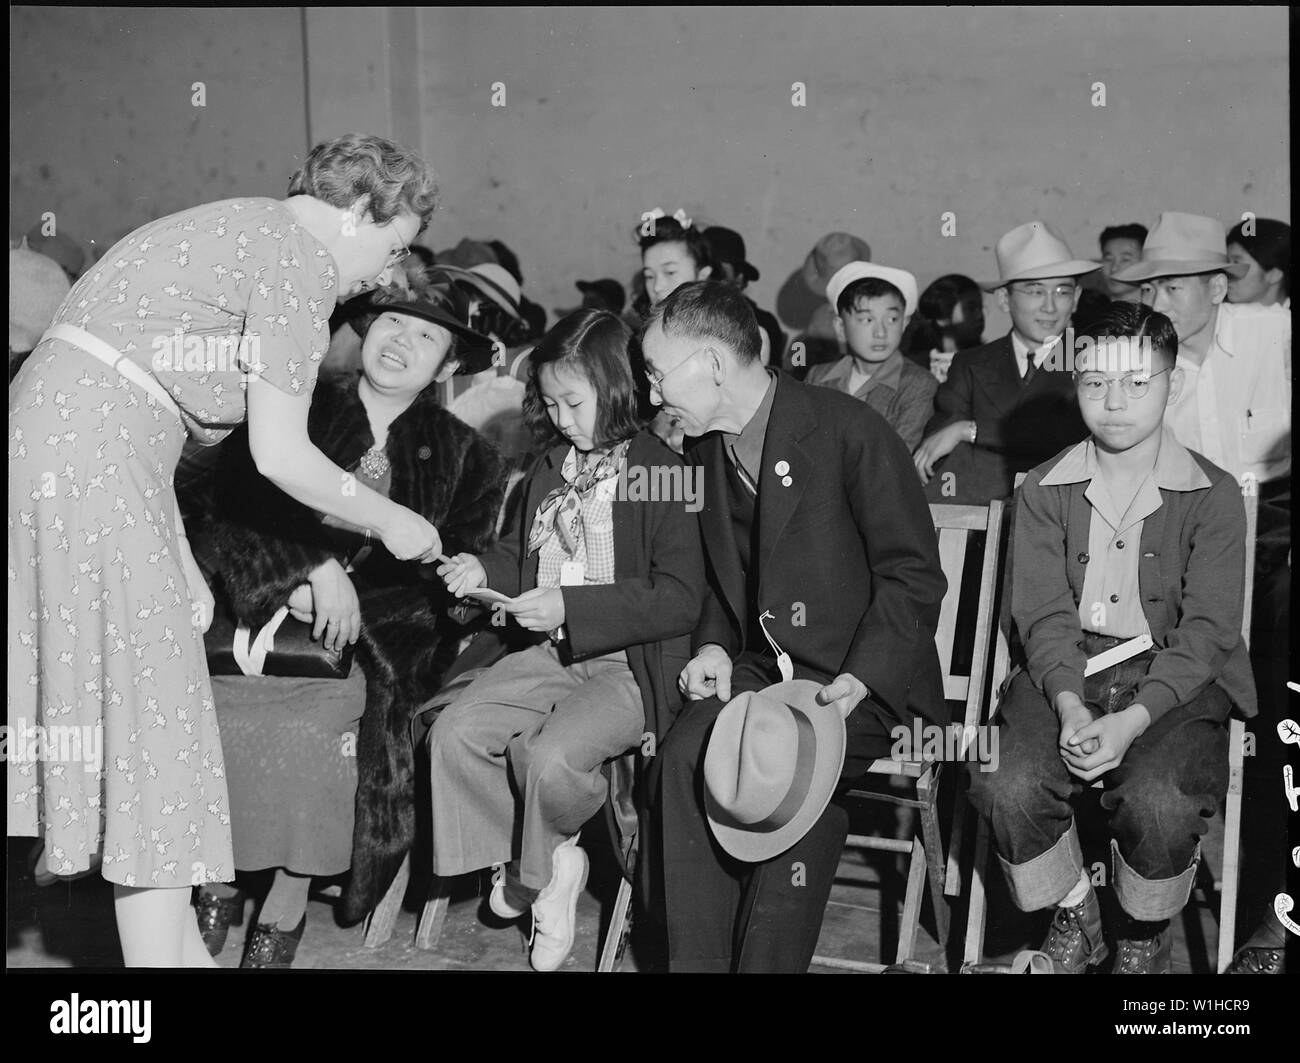 Oakland, California. Mr. and Mrs. Kitagaki with two of their children at the Wartime Civil Control . . .; Scope and content:  The full caption for this photograph reads: Oakland, California. Mr. and Mrs. Kitagaki with two of their children at the Wartime Civil Control Administration station a few minutes before departure by bus for Tanforan Assembly center. A local church member is handing Kimiko a pamphlet expressing the good wishes of the church toward the departing evacuees. Mr. Kitagaki, prior to evacuation, was in the cleaning and dyeing business. Stock Photo